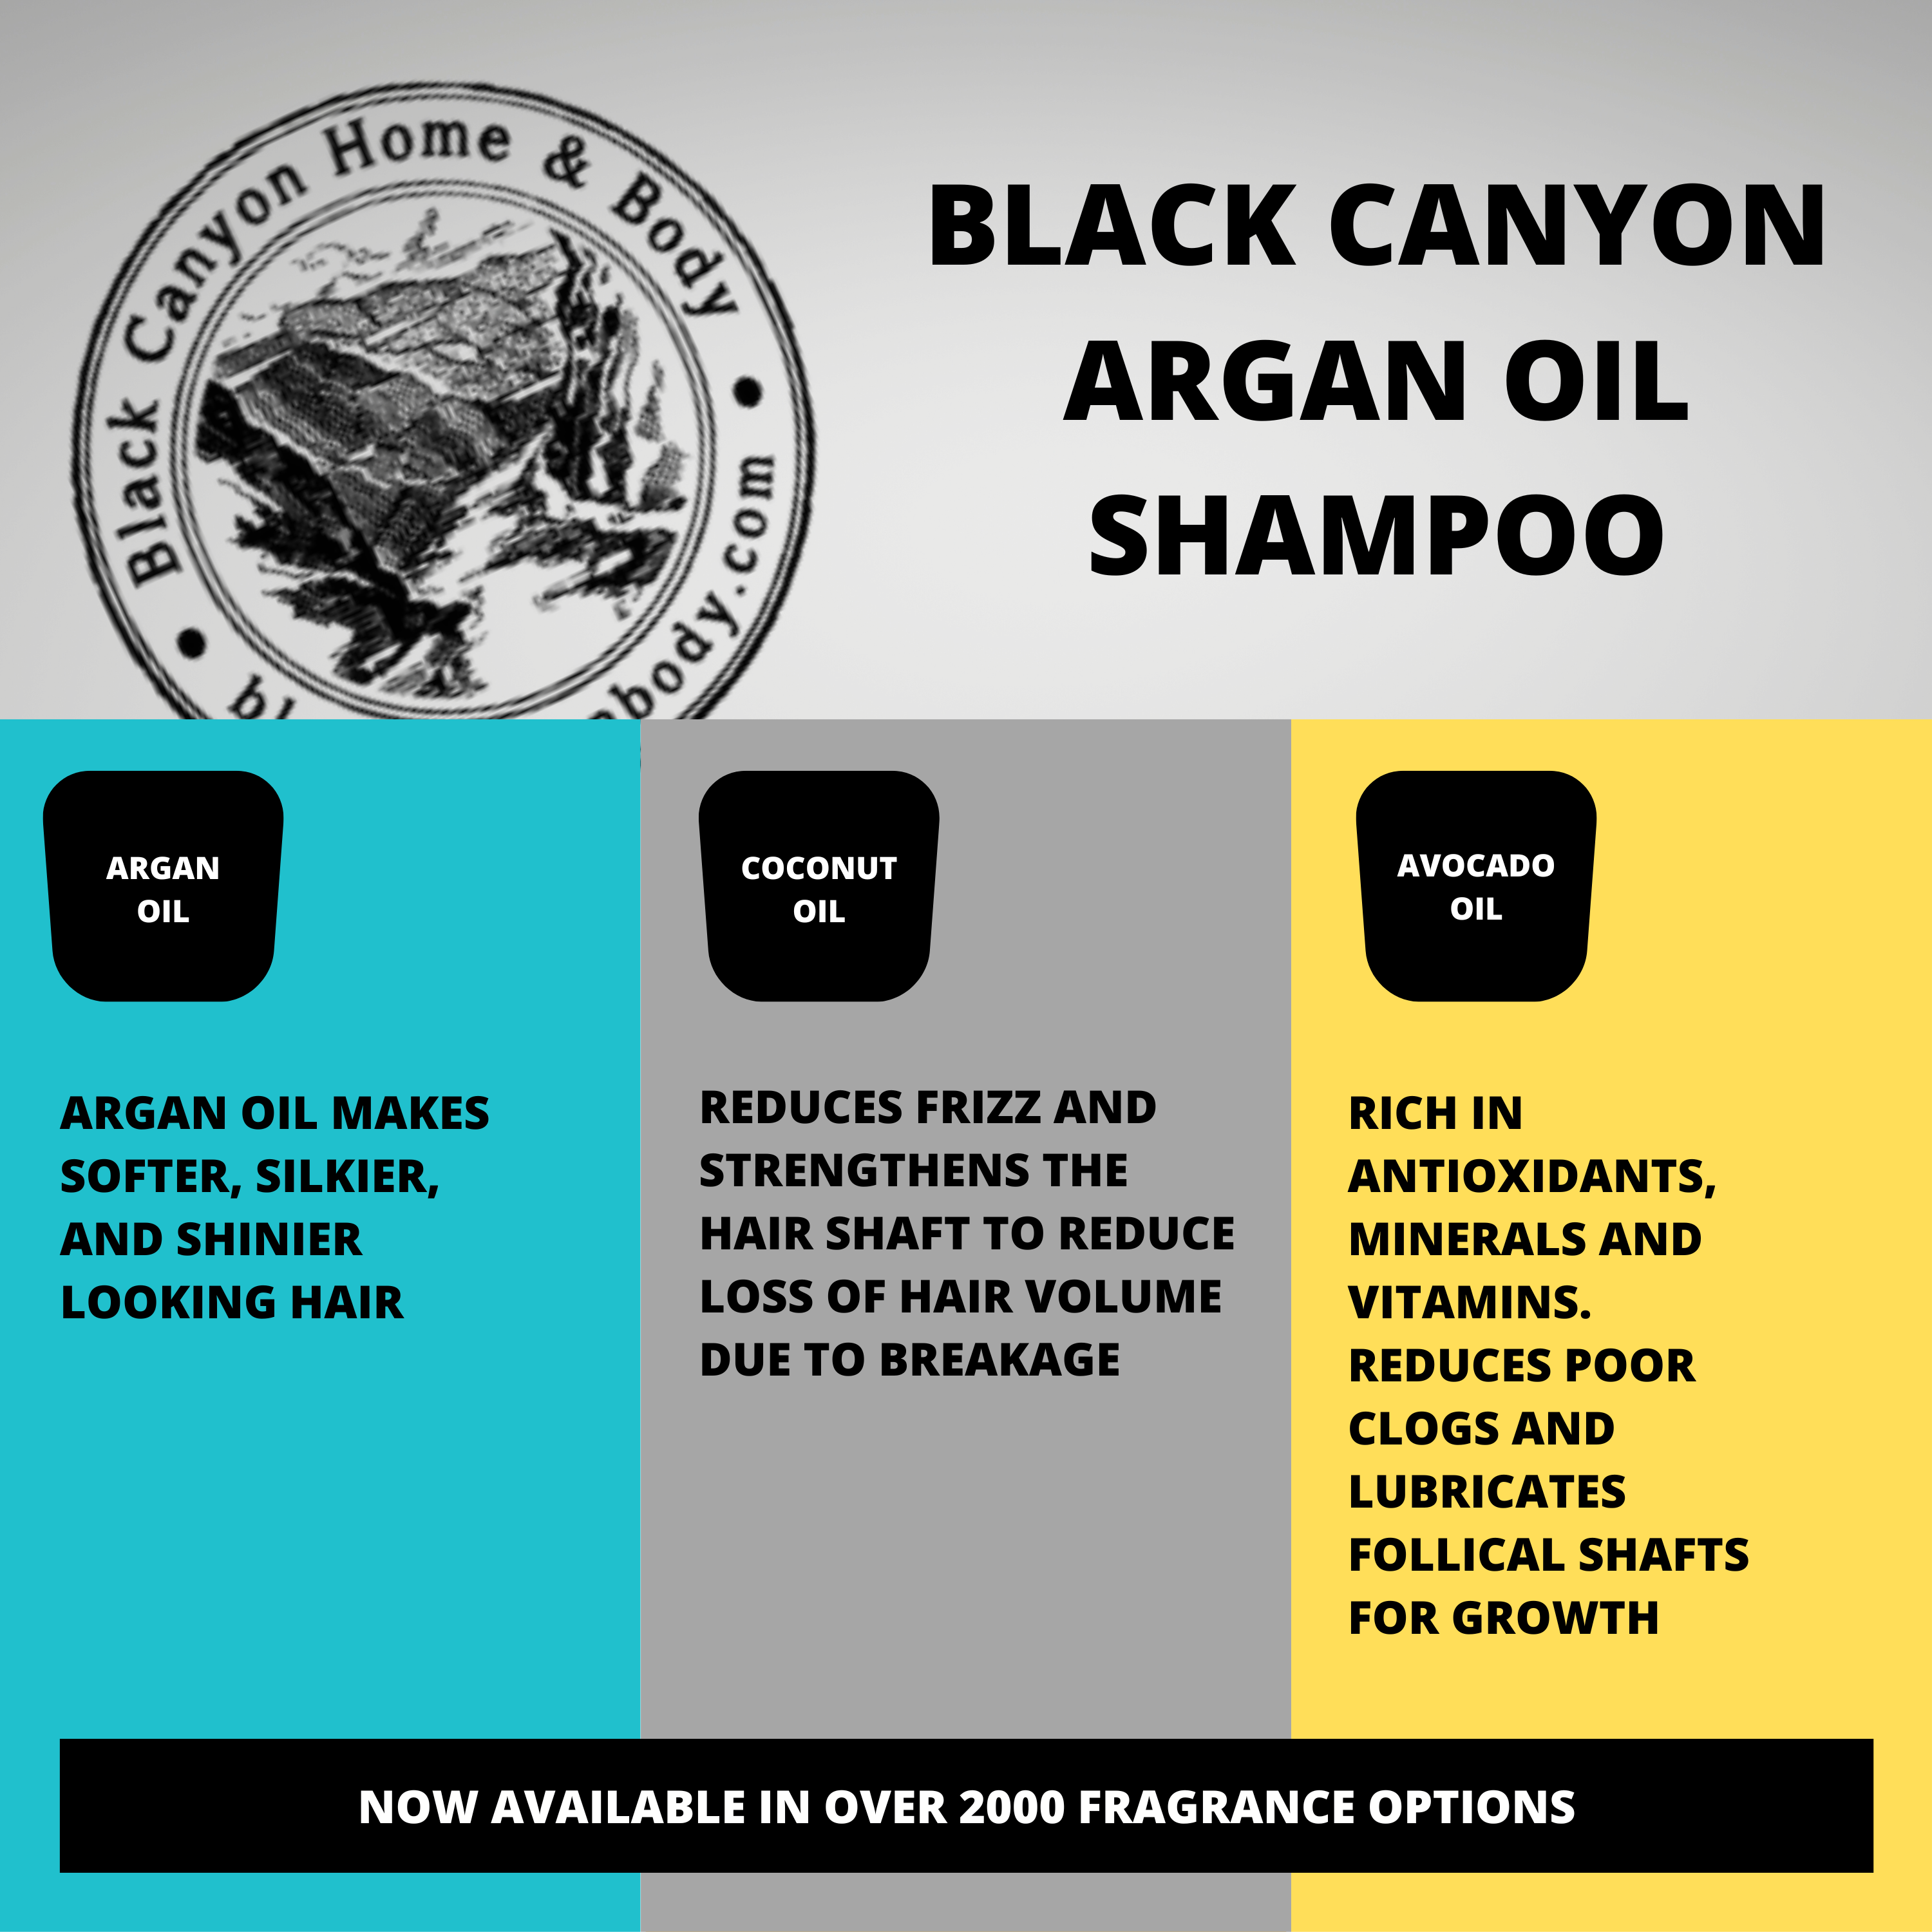 Black Canyon Butter Brickle Scented Shampoo with Argan Oil